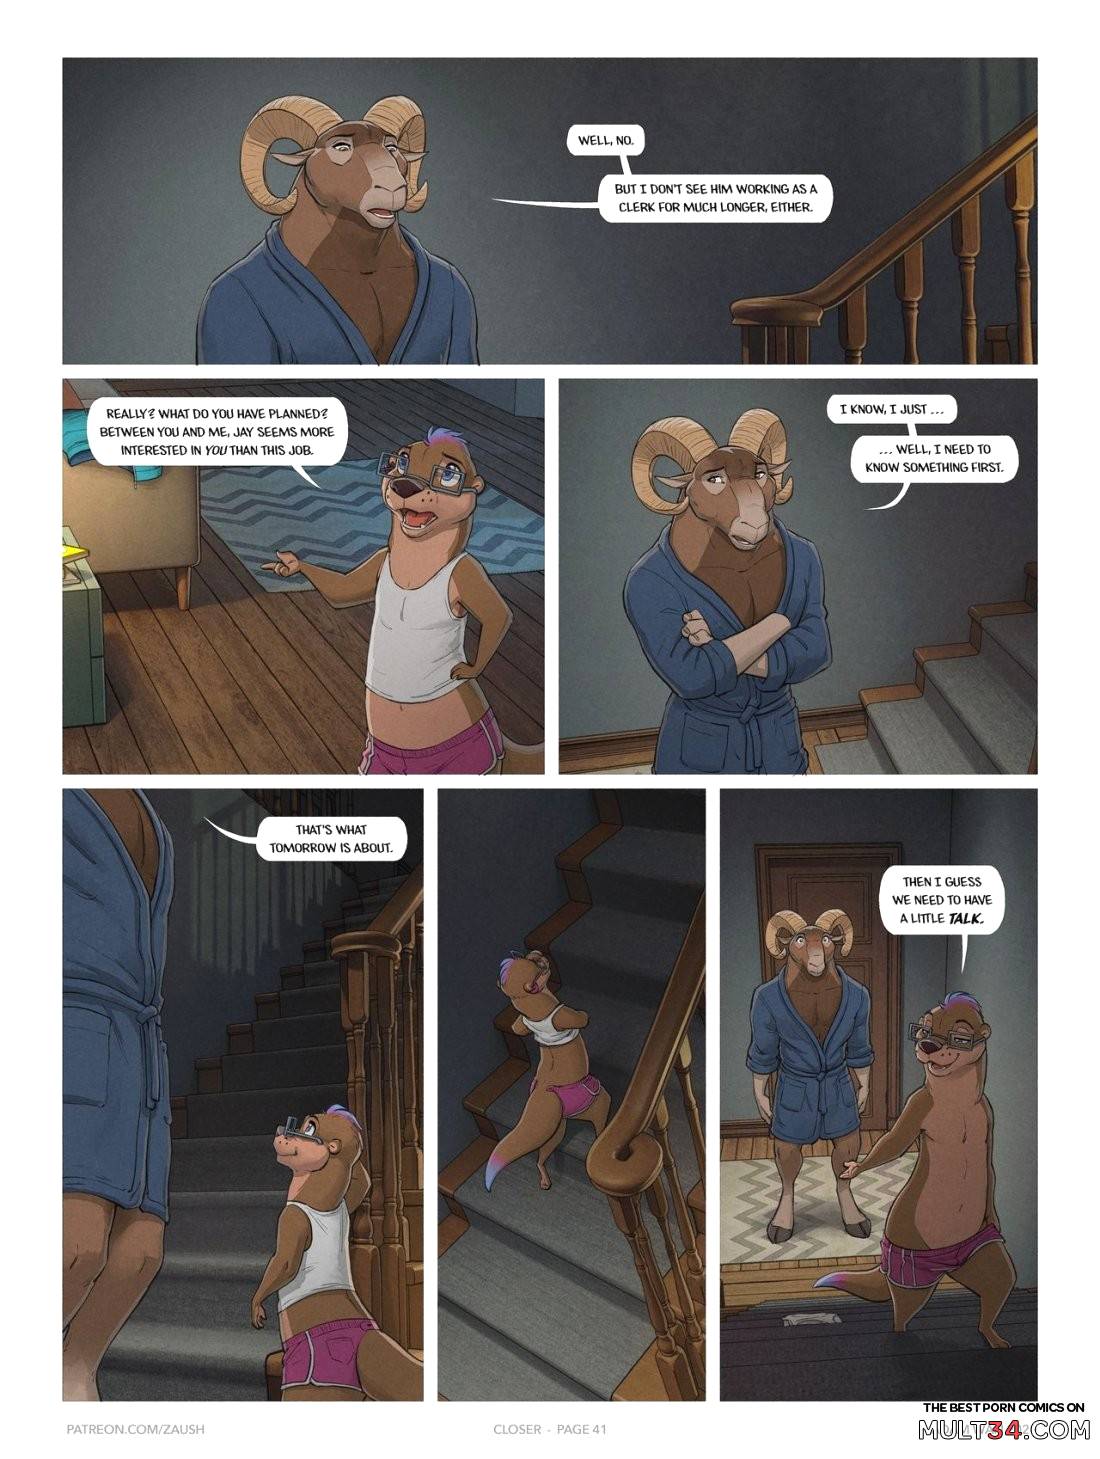 Closer page 41